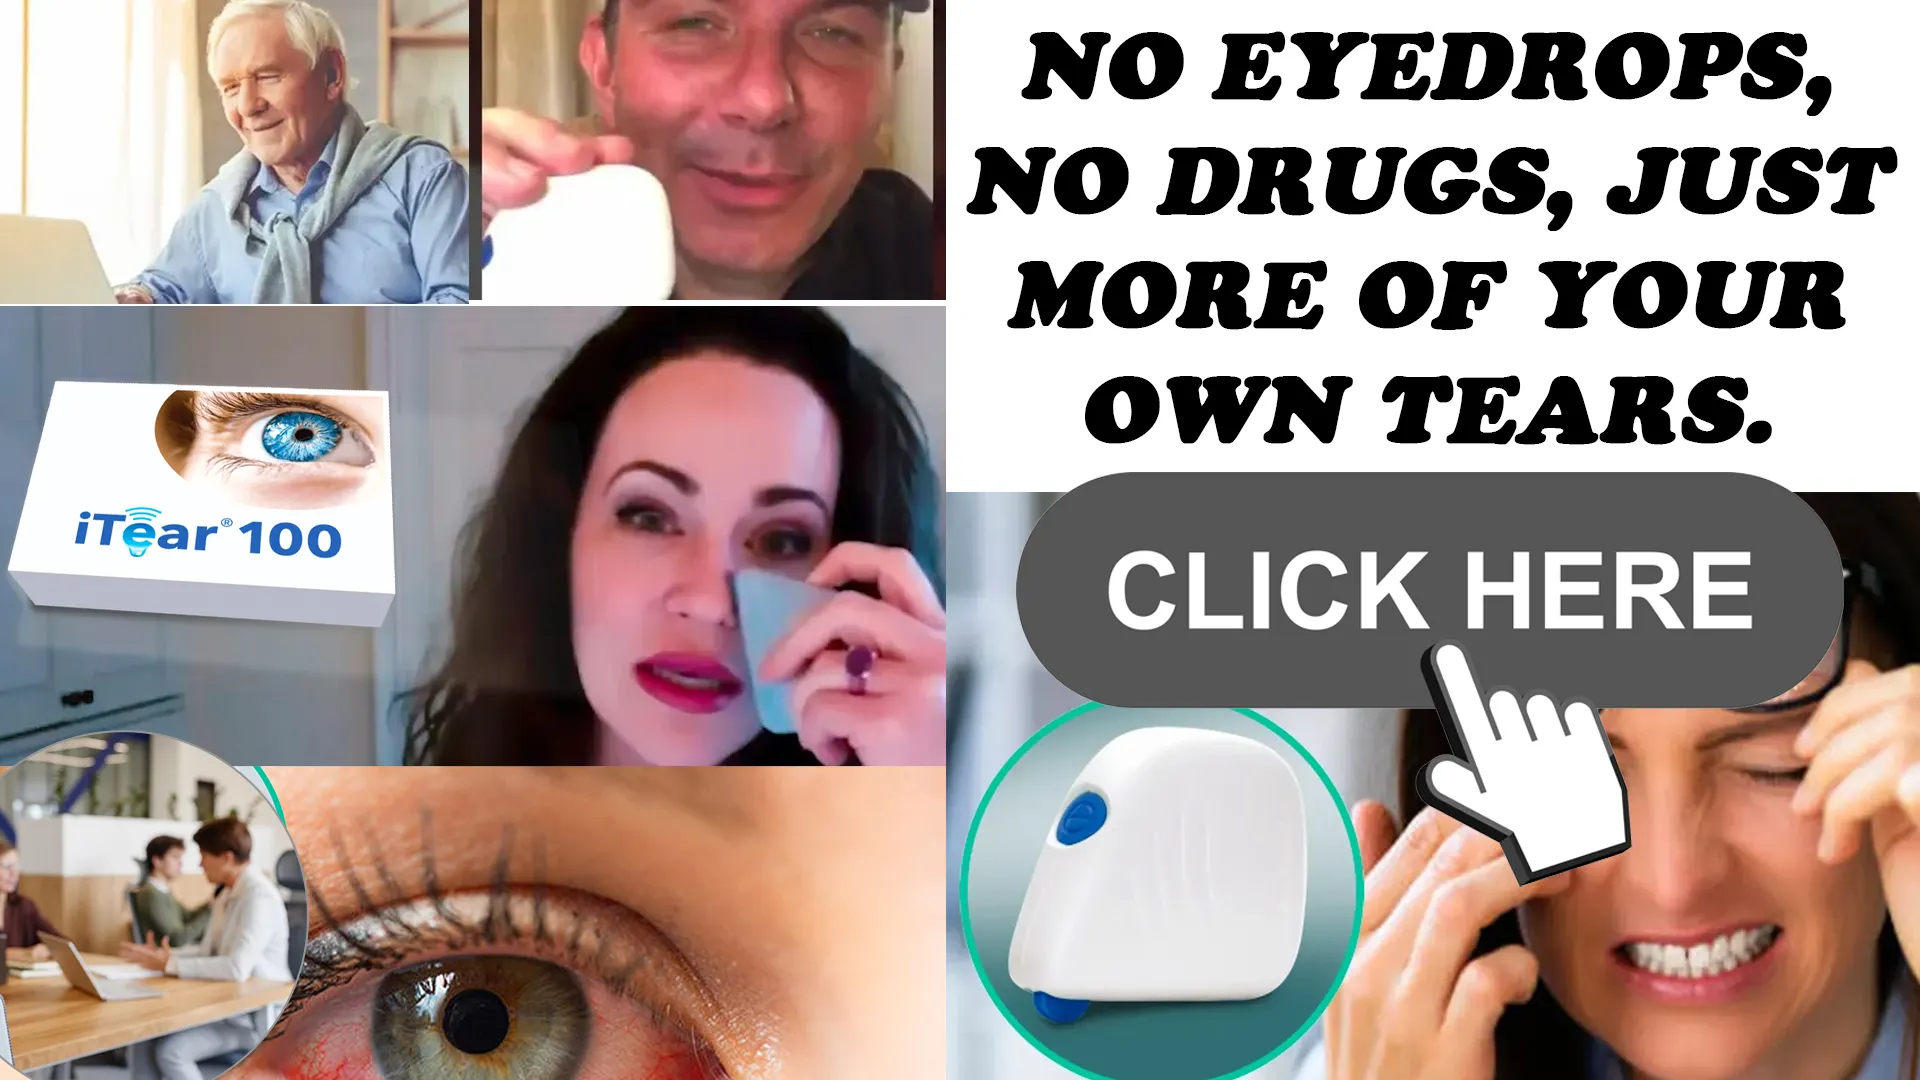 Why You Should Opt for the iTEAR100 Over Other Dry Eye Remedies